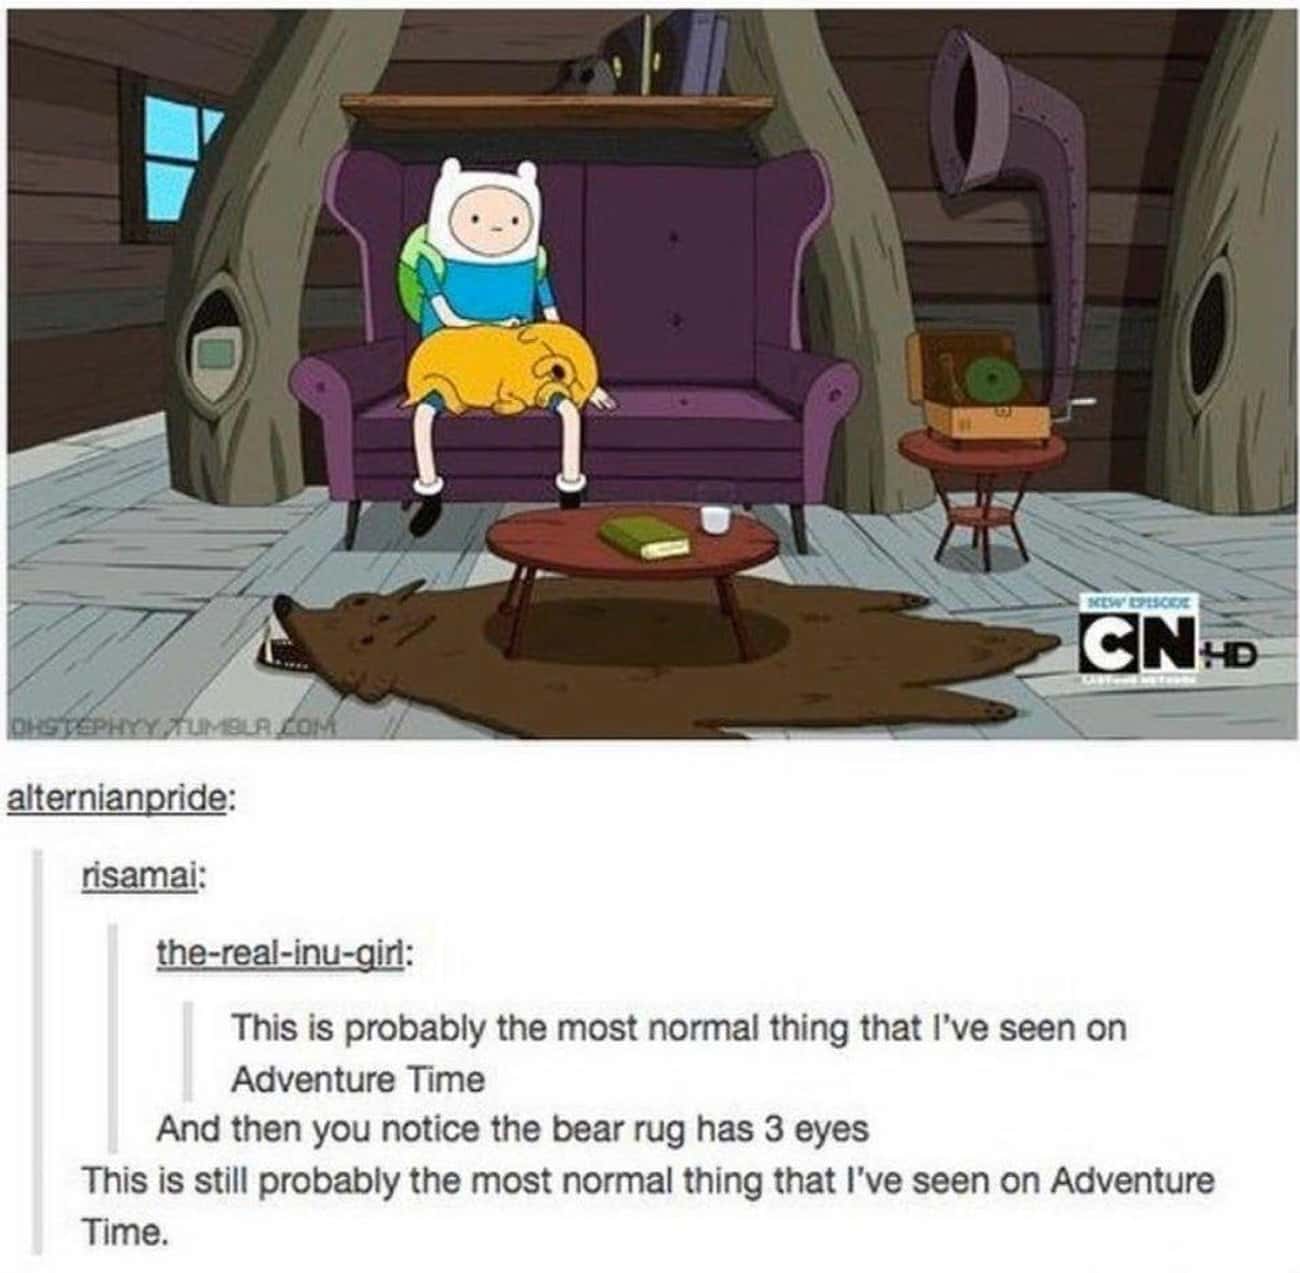 The Most Normal Things That’s Come Out Of ‘Adventure Time’